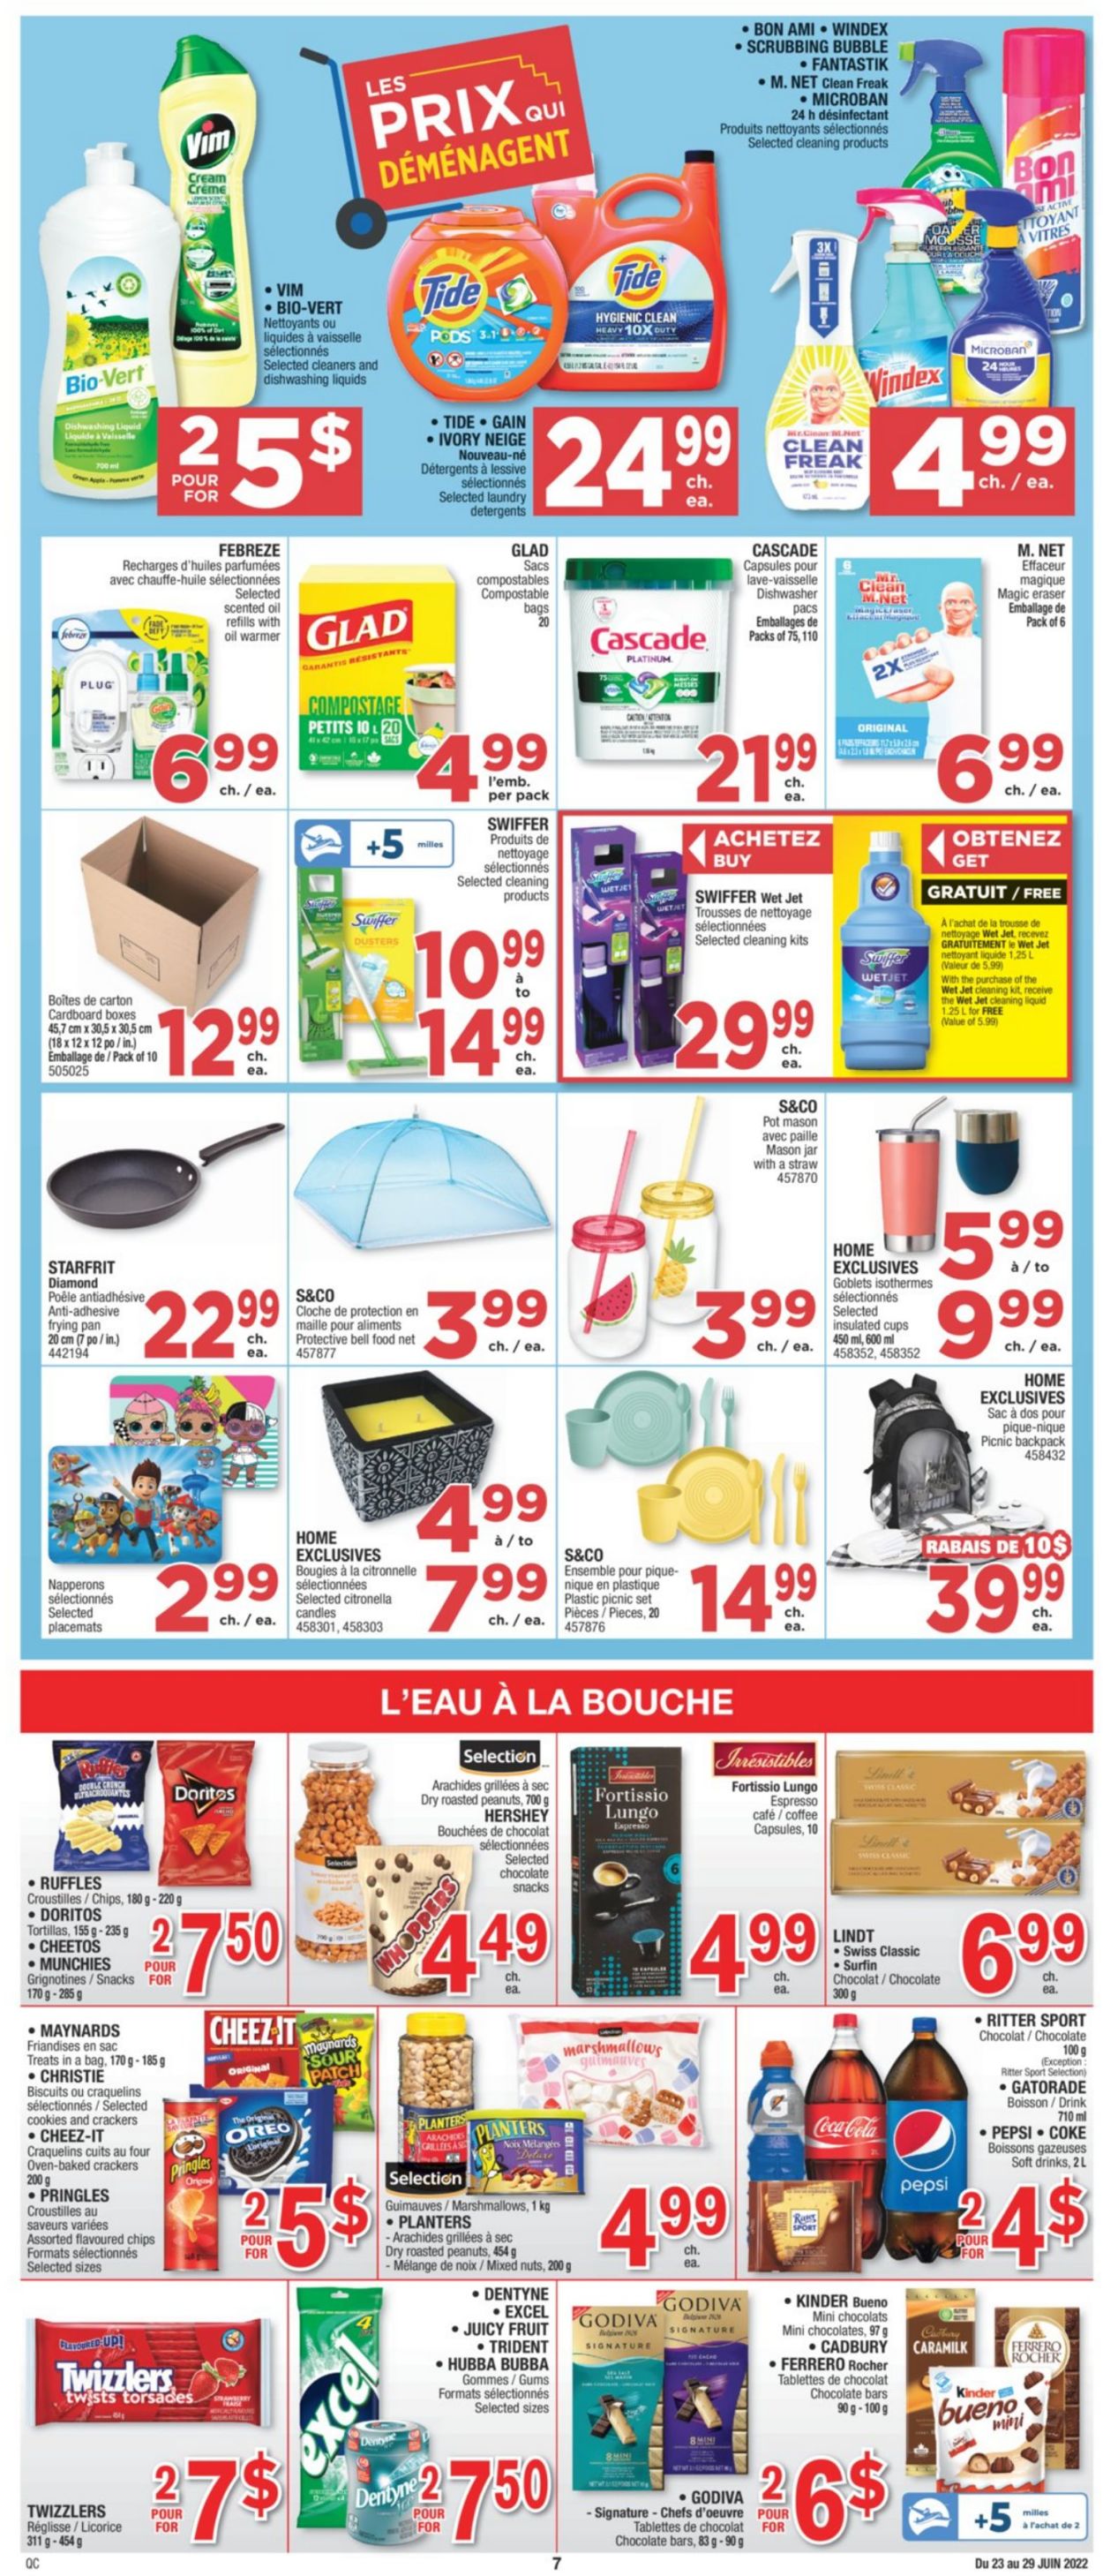 Jean Coutu Flyer - 06/23-06/29/2022 (Page 8)